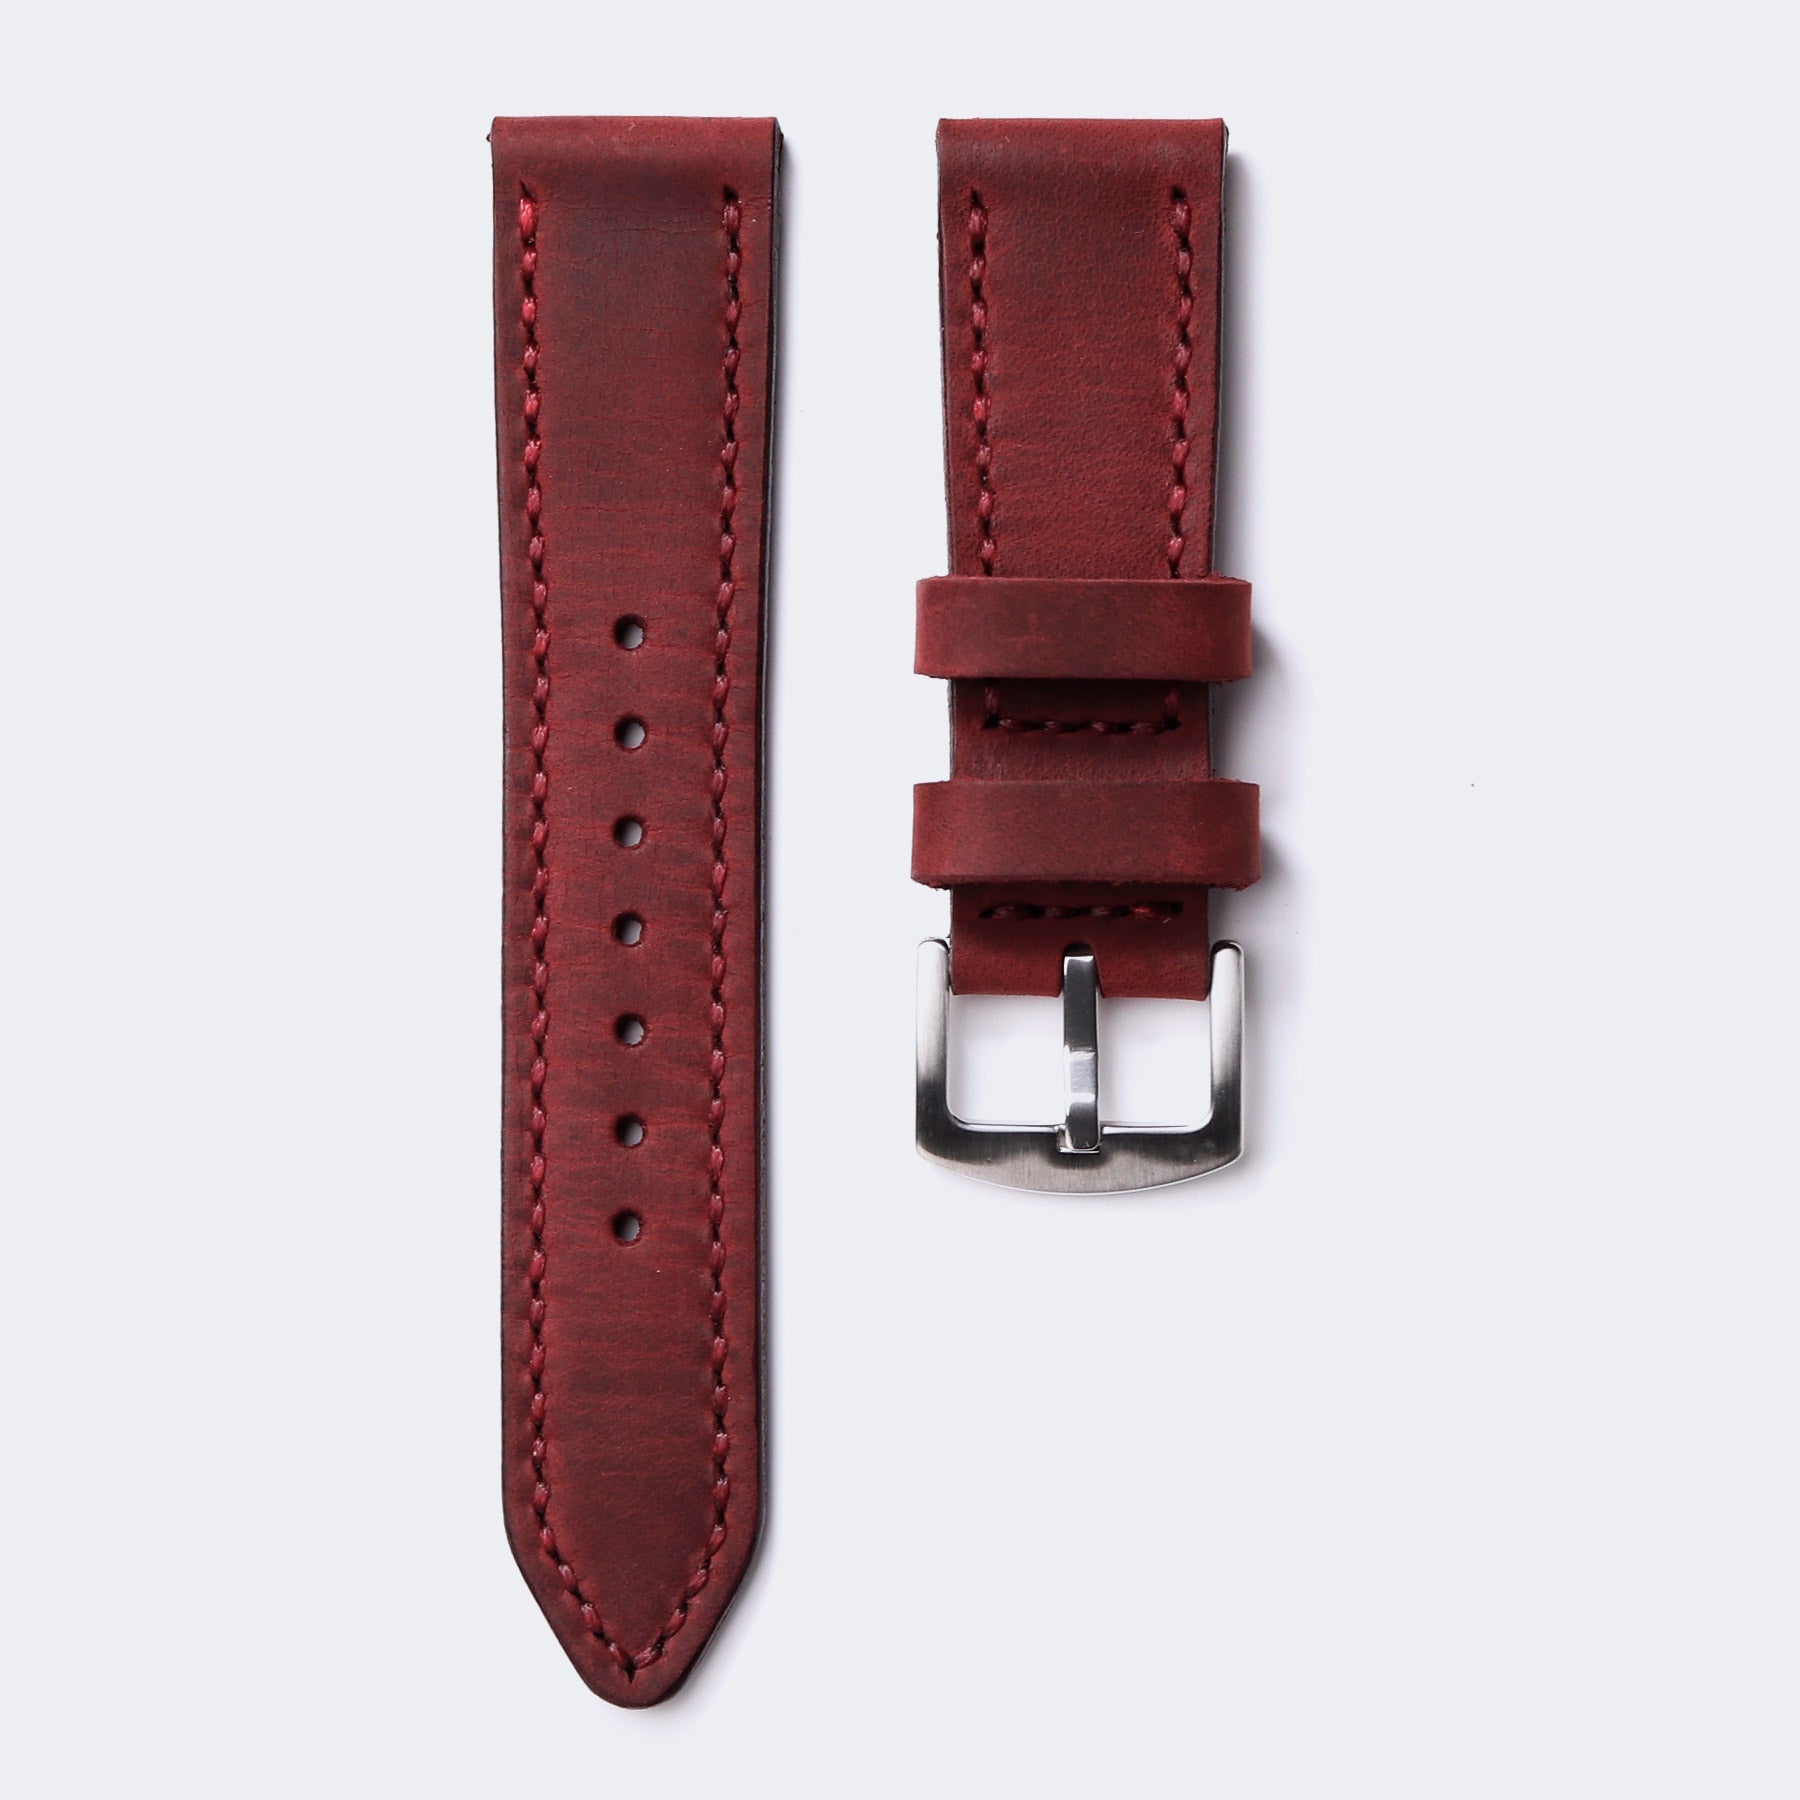 Custom Made Leather Watch Strap